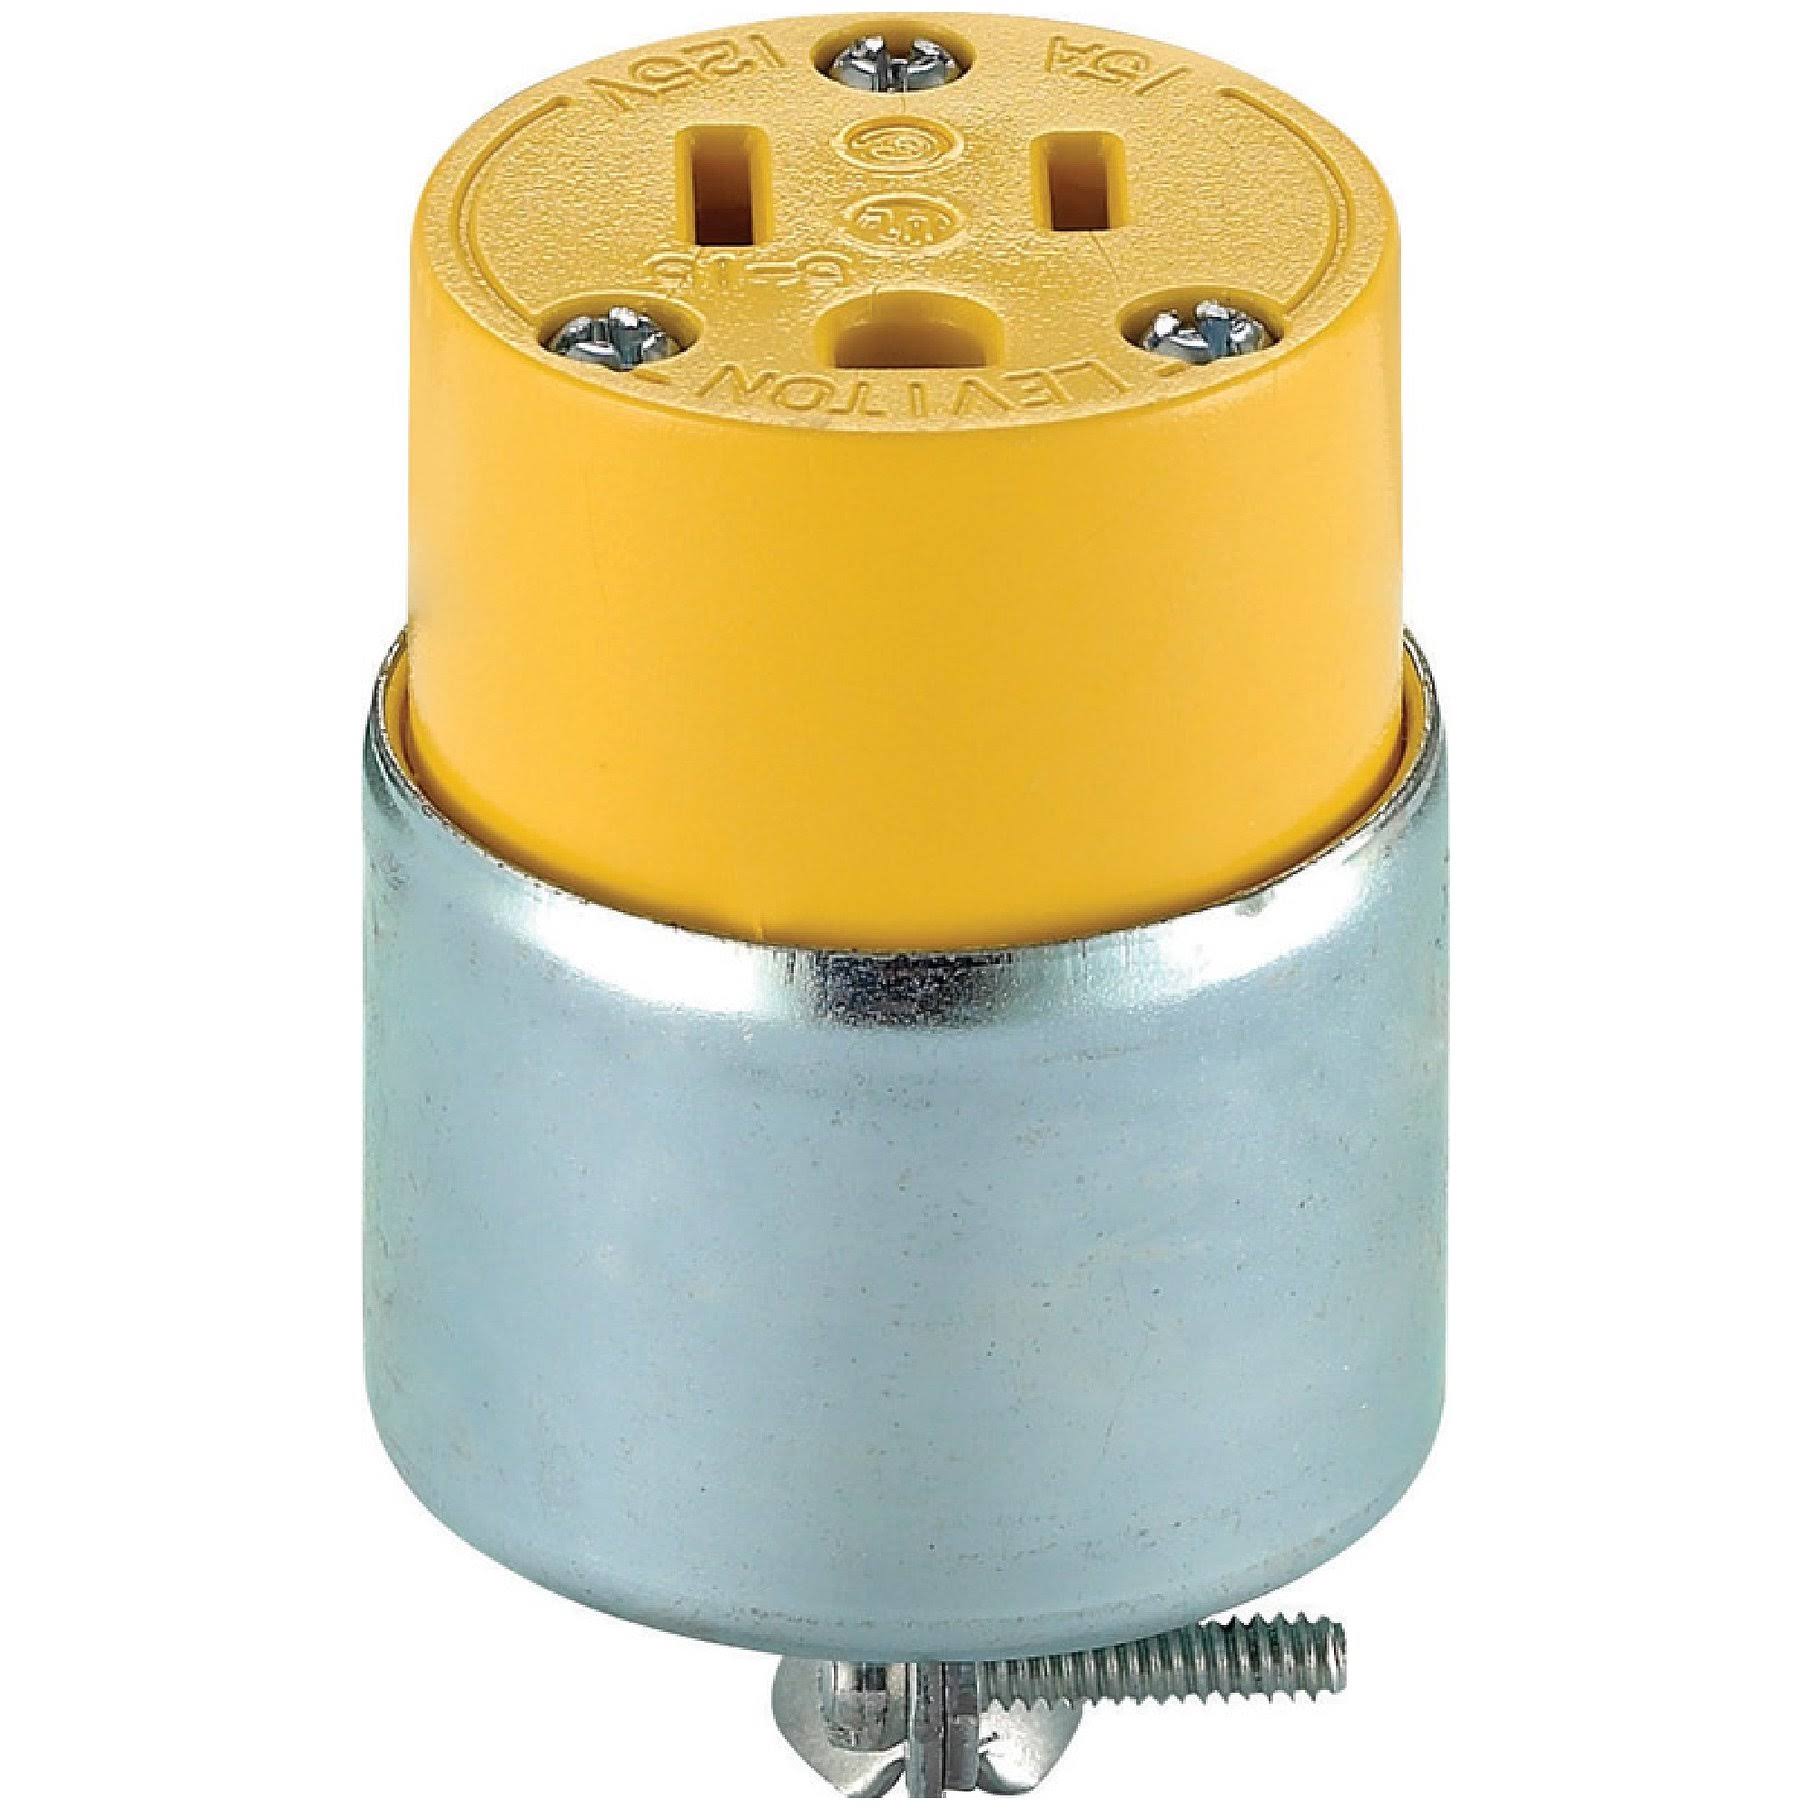 Leviton Round Dead Front Connector - Yellow, 15amp